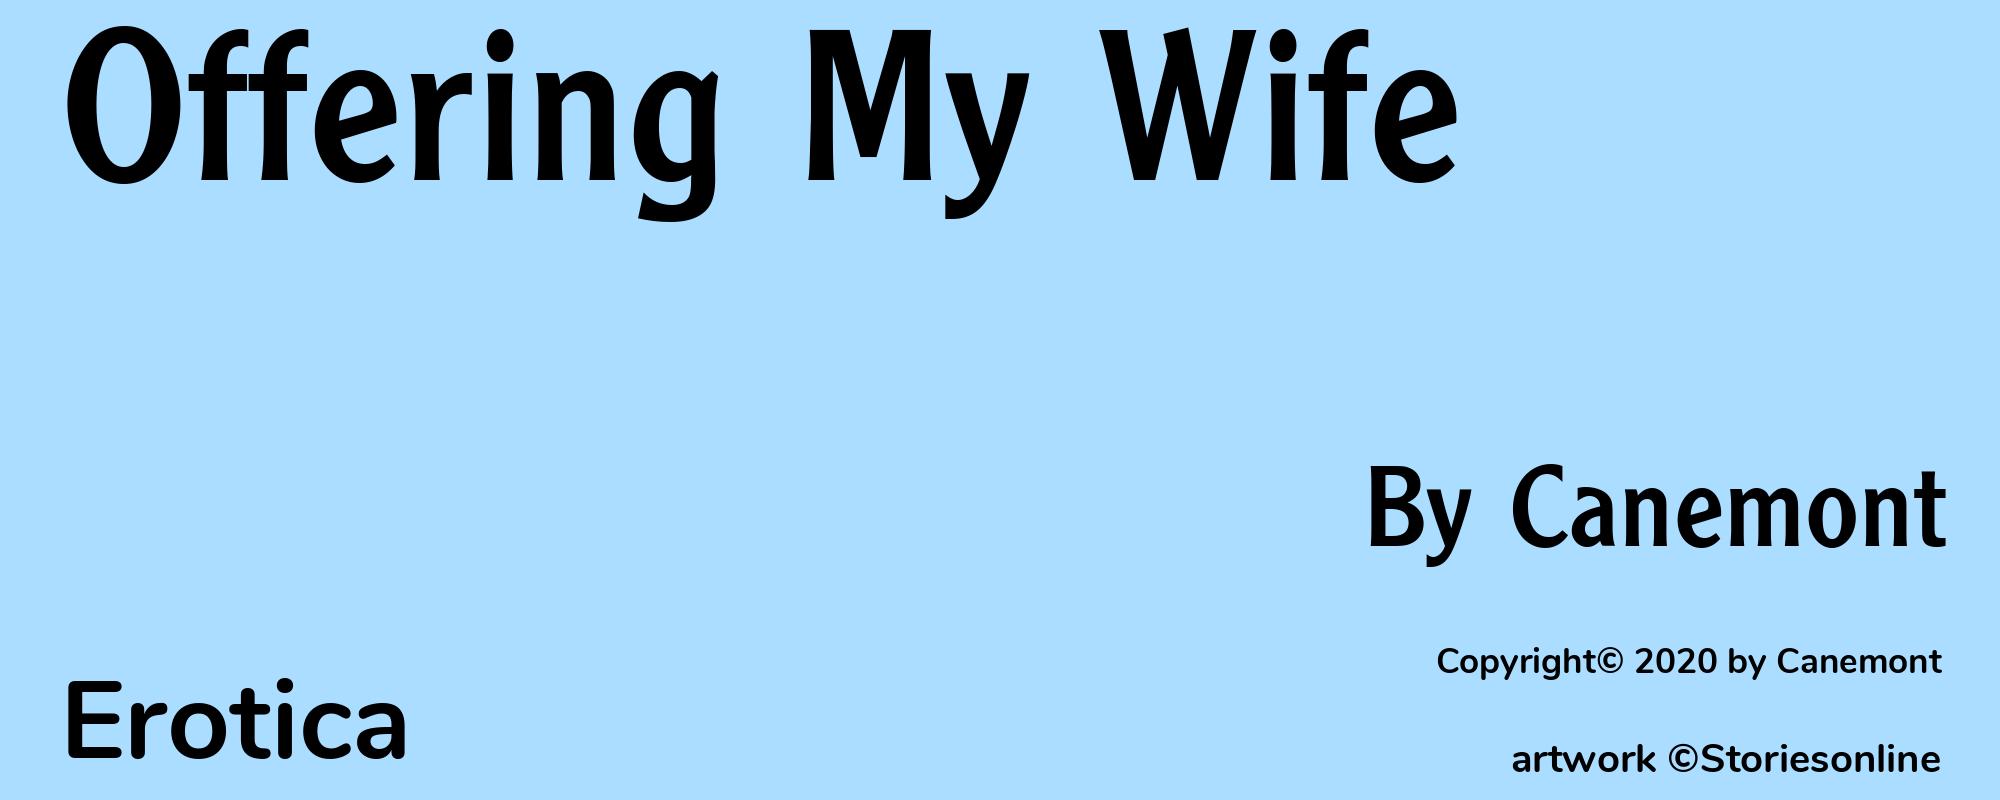 Offering My Wife - Cover